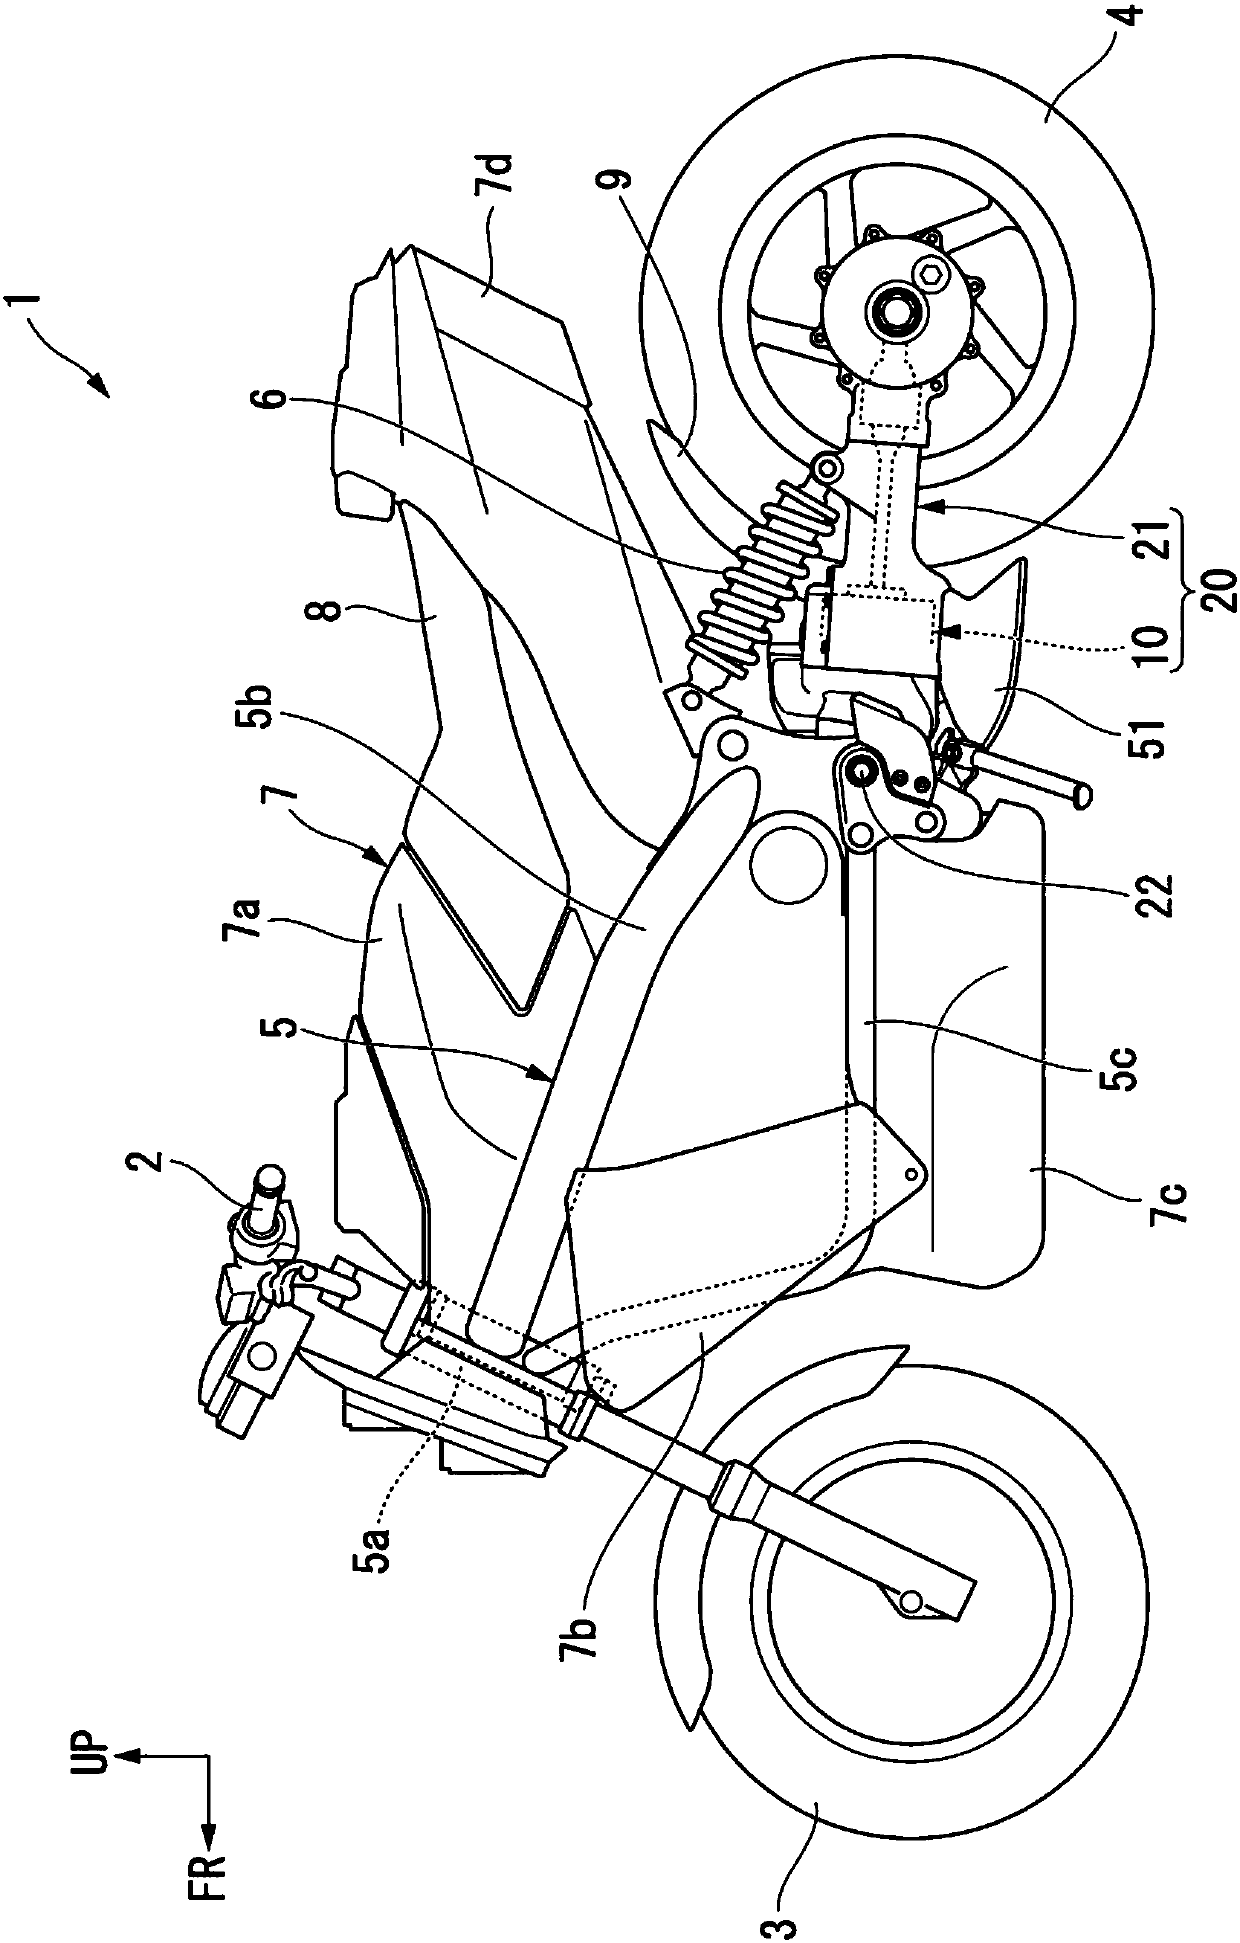 Swing arm structure for saddle riding electric vehicle